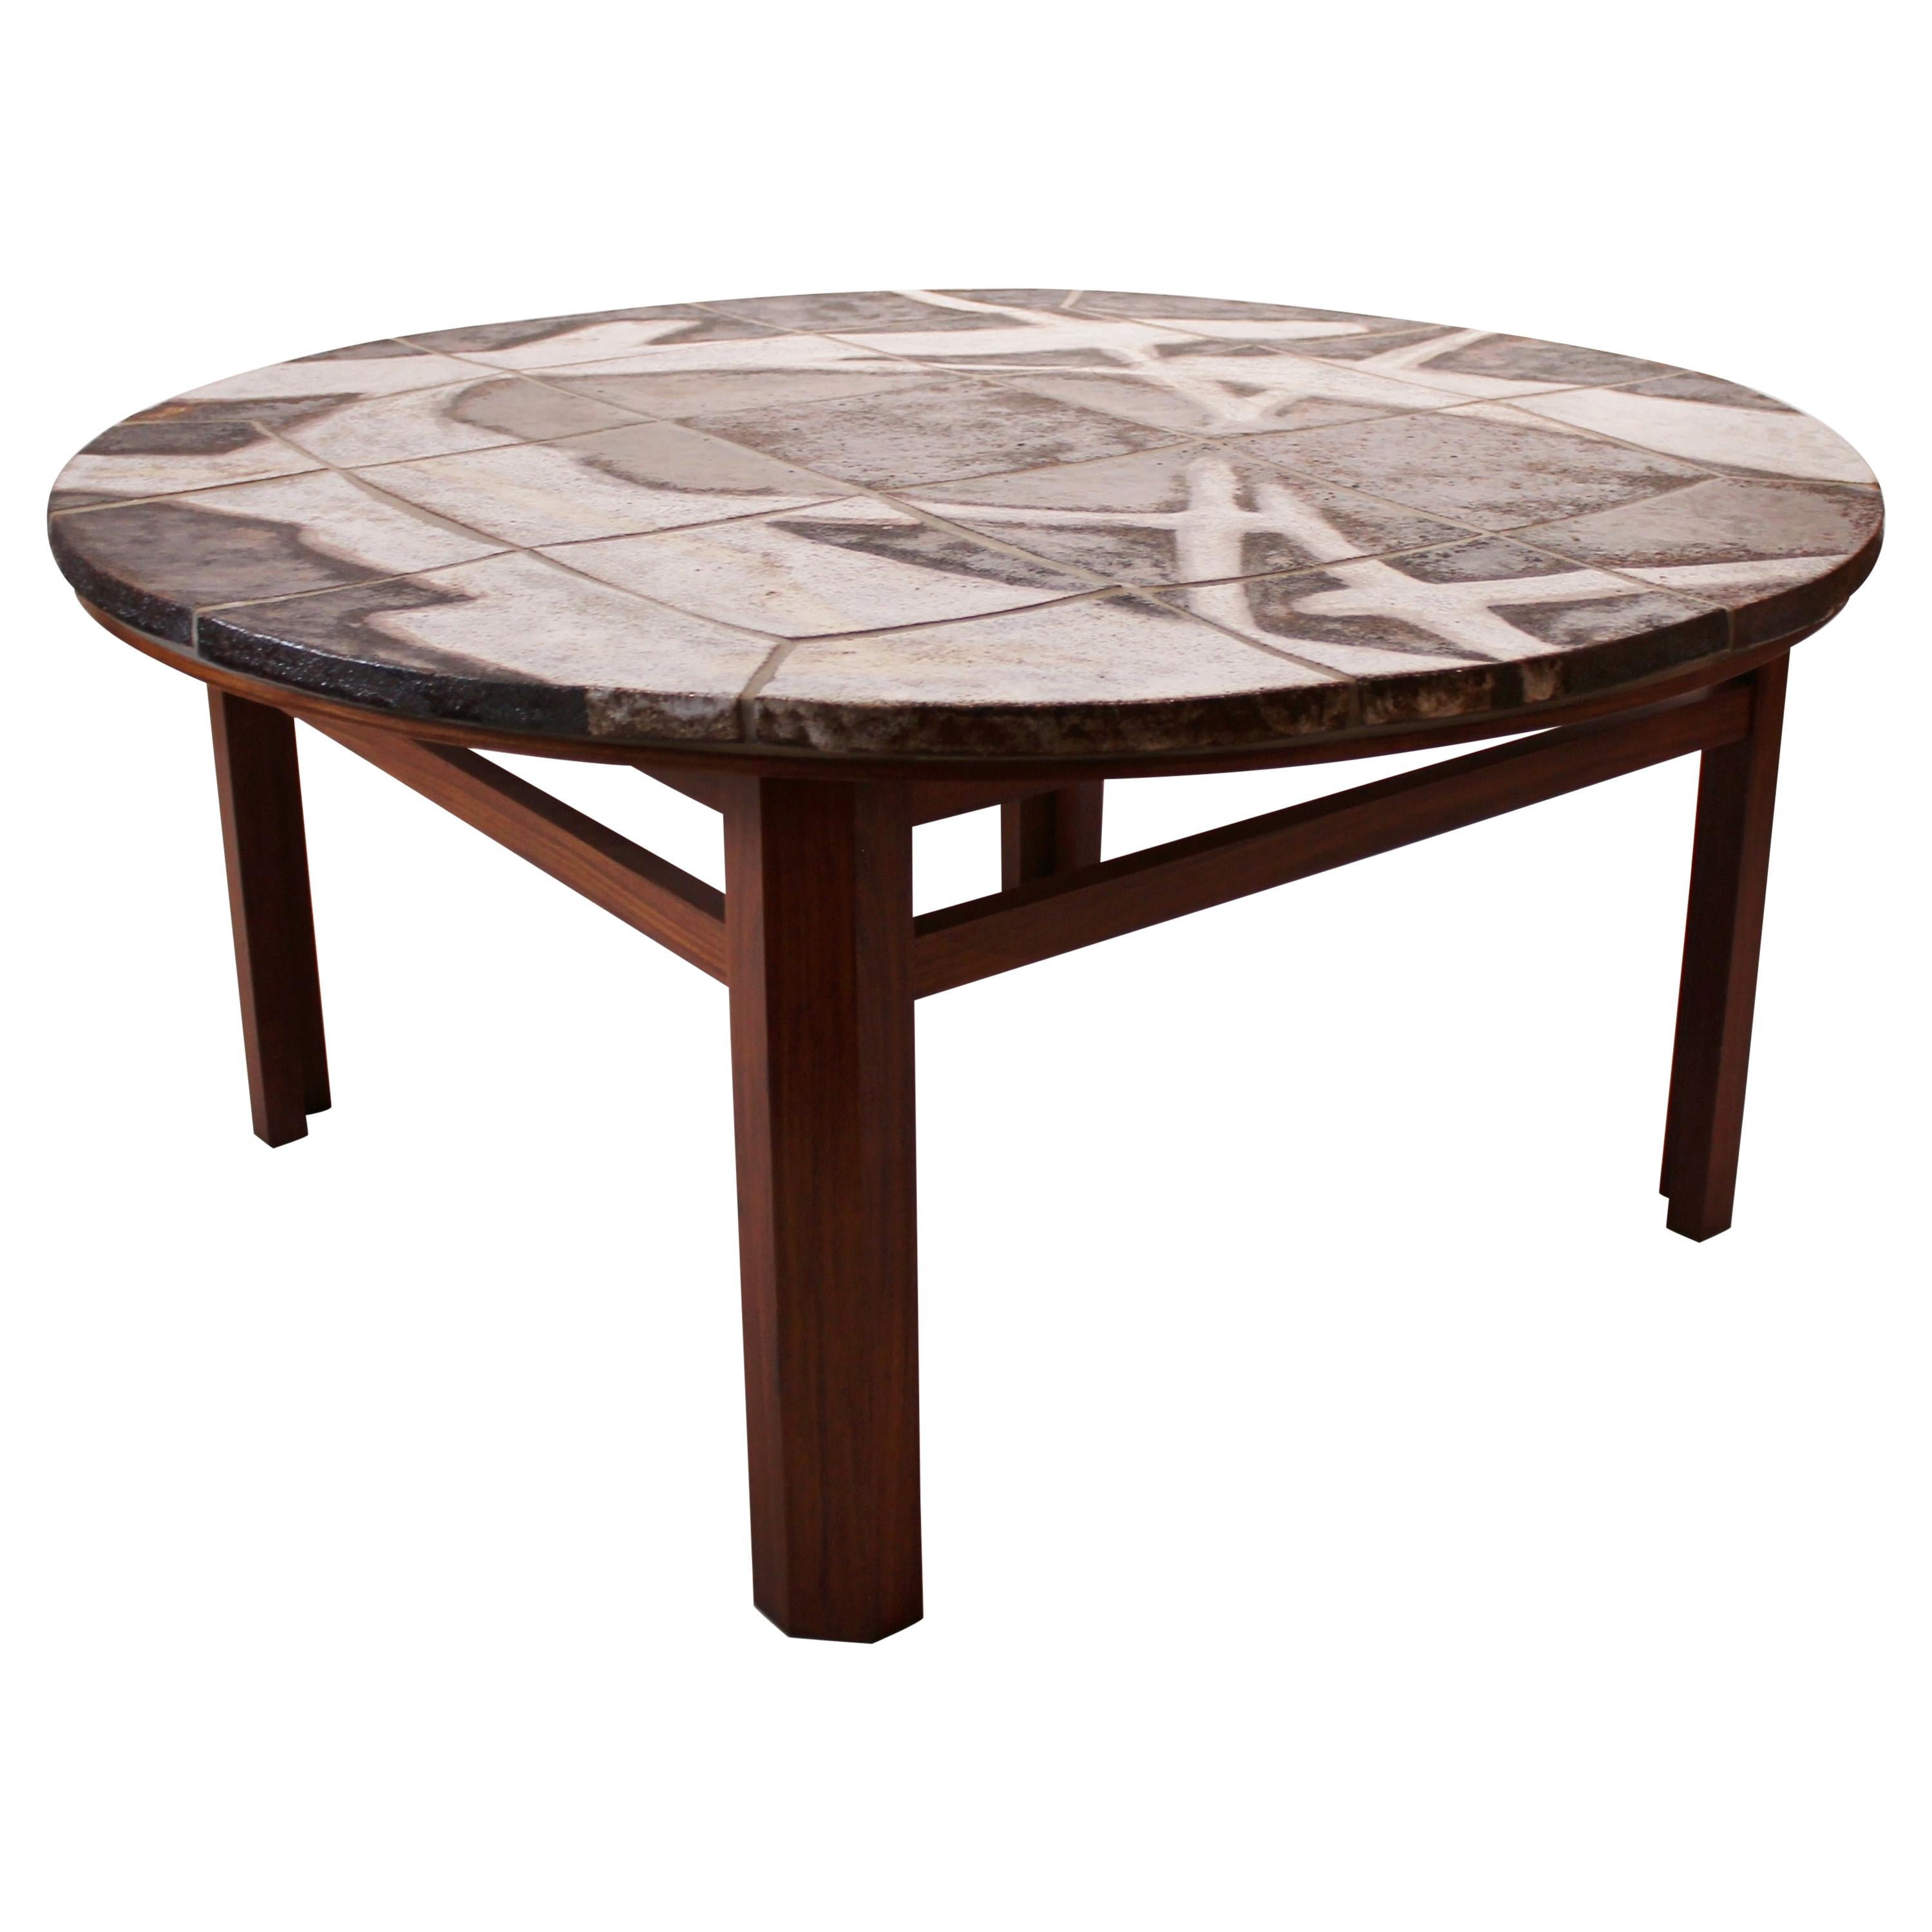 Large Round Coffee Table with Stone Plate and of Rosewood, Danish Design, 1960